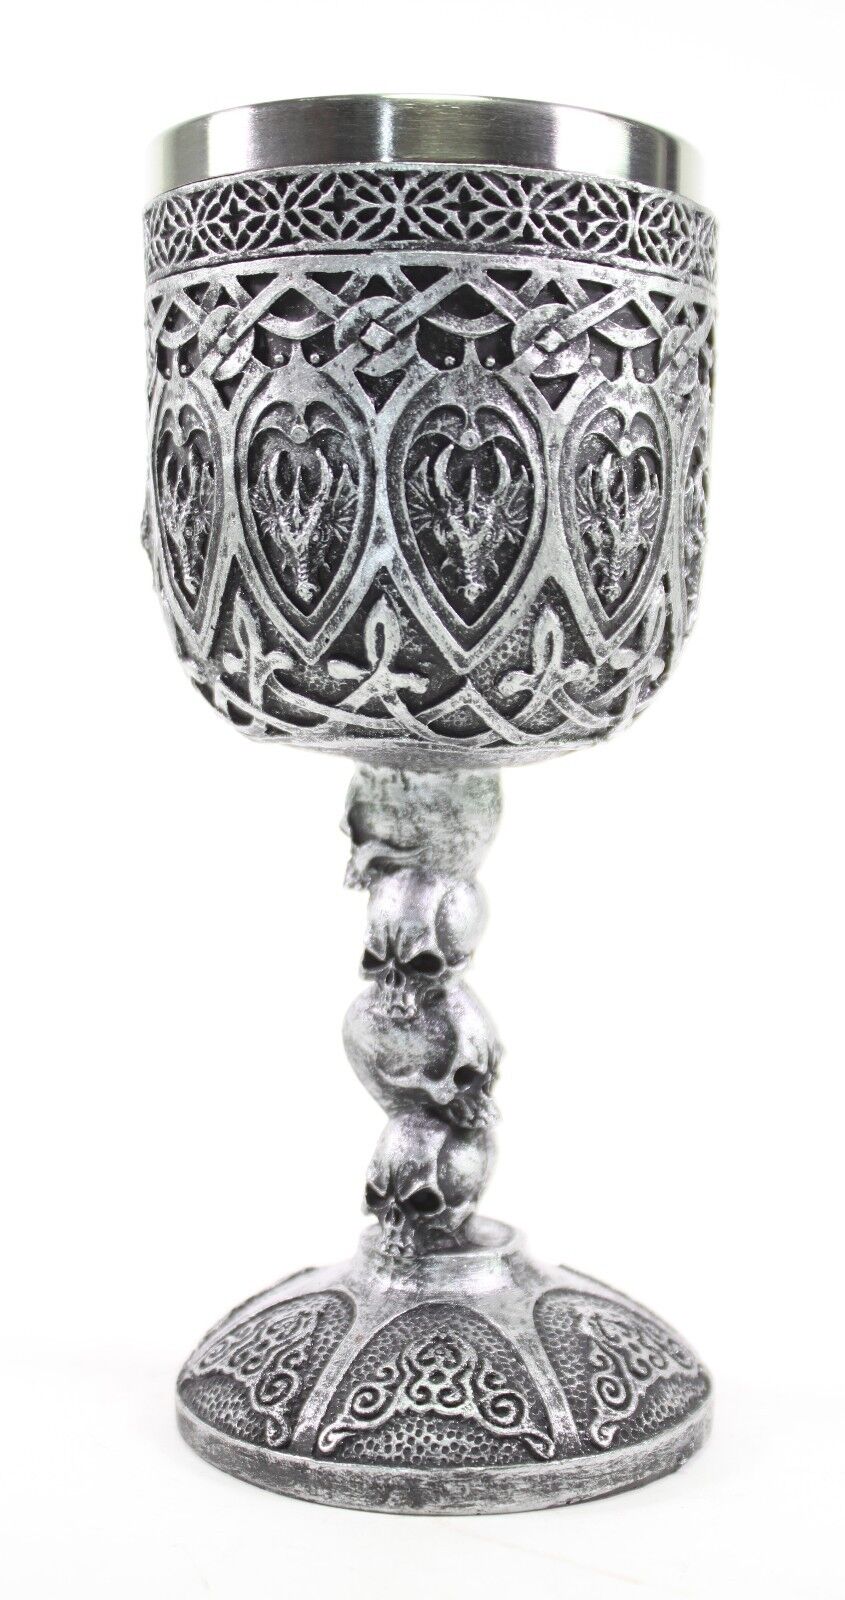 Silver Royal Dragon Wine Goblet Skulls Medieval Collectible Home Decor Gift